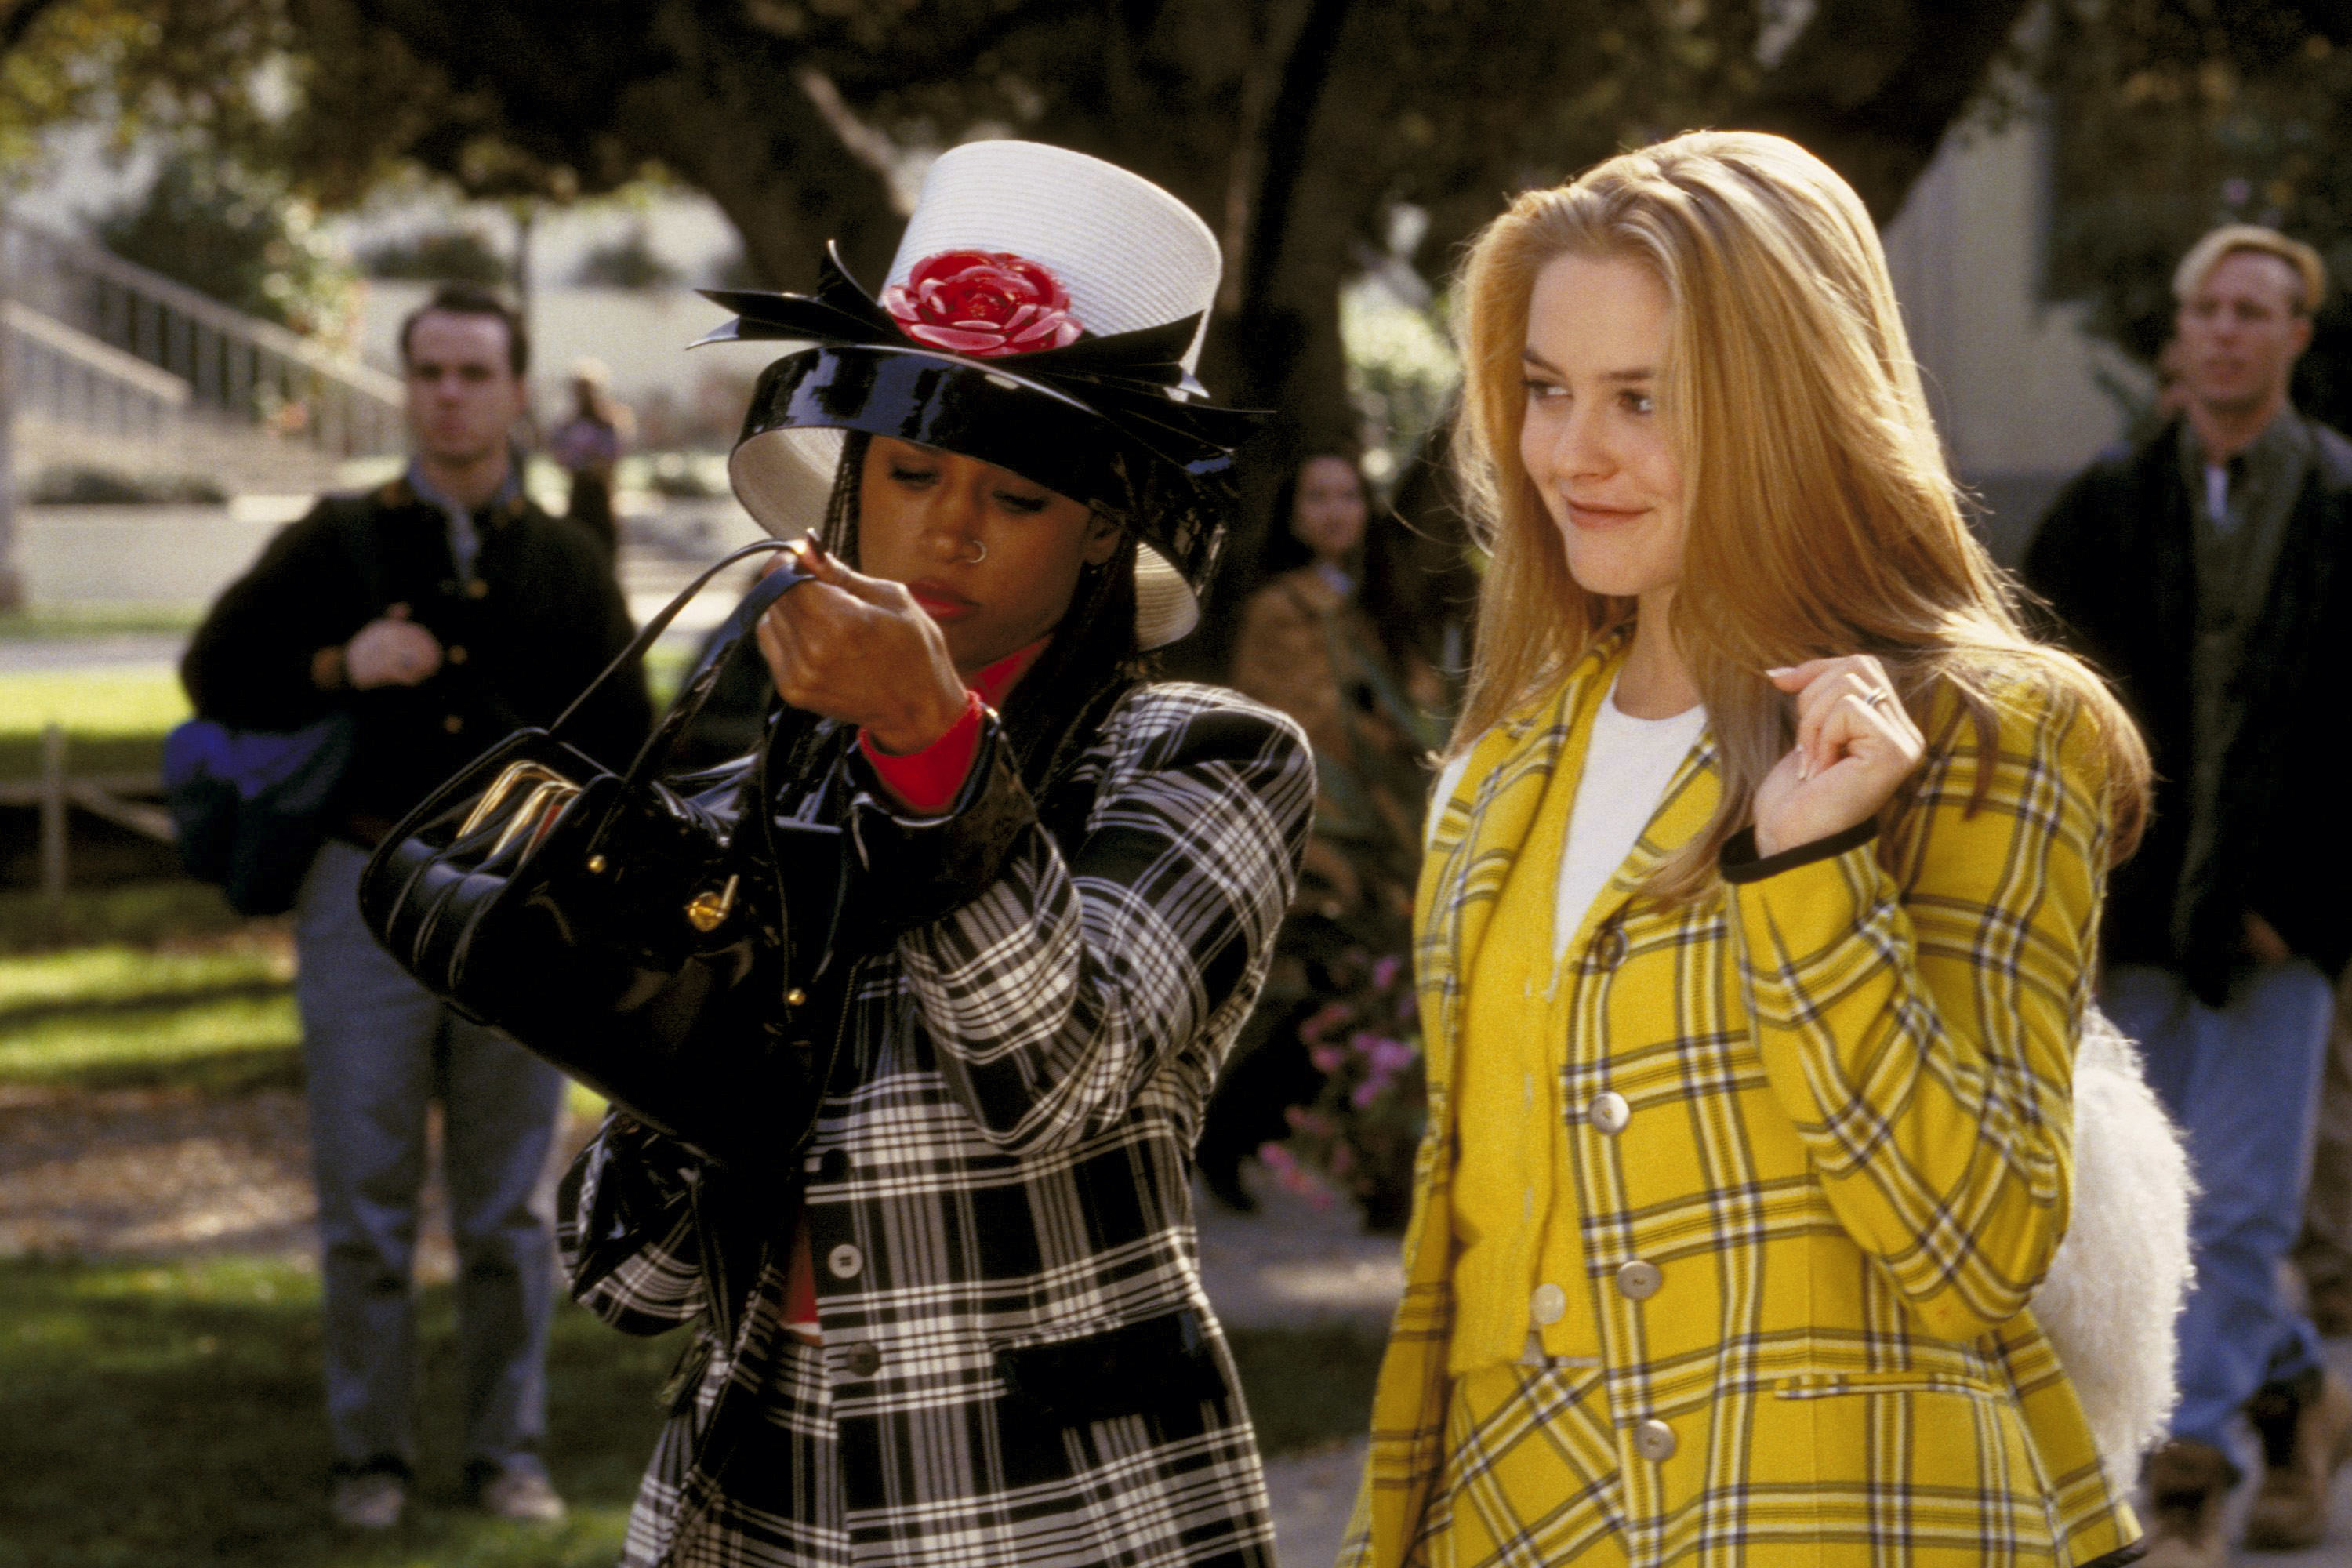 Dionne and Cher wearing checkered suits